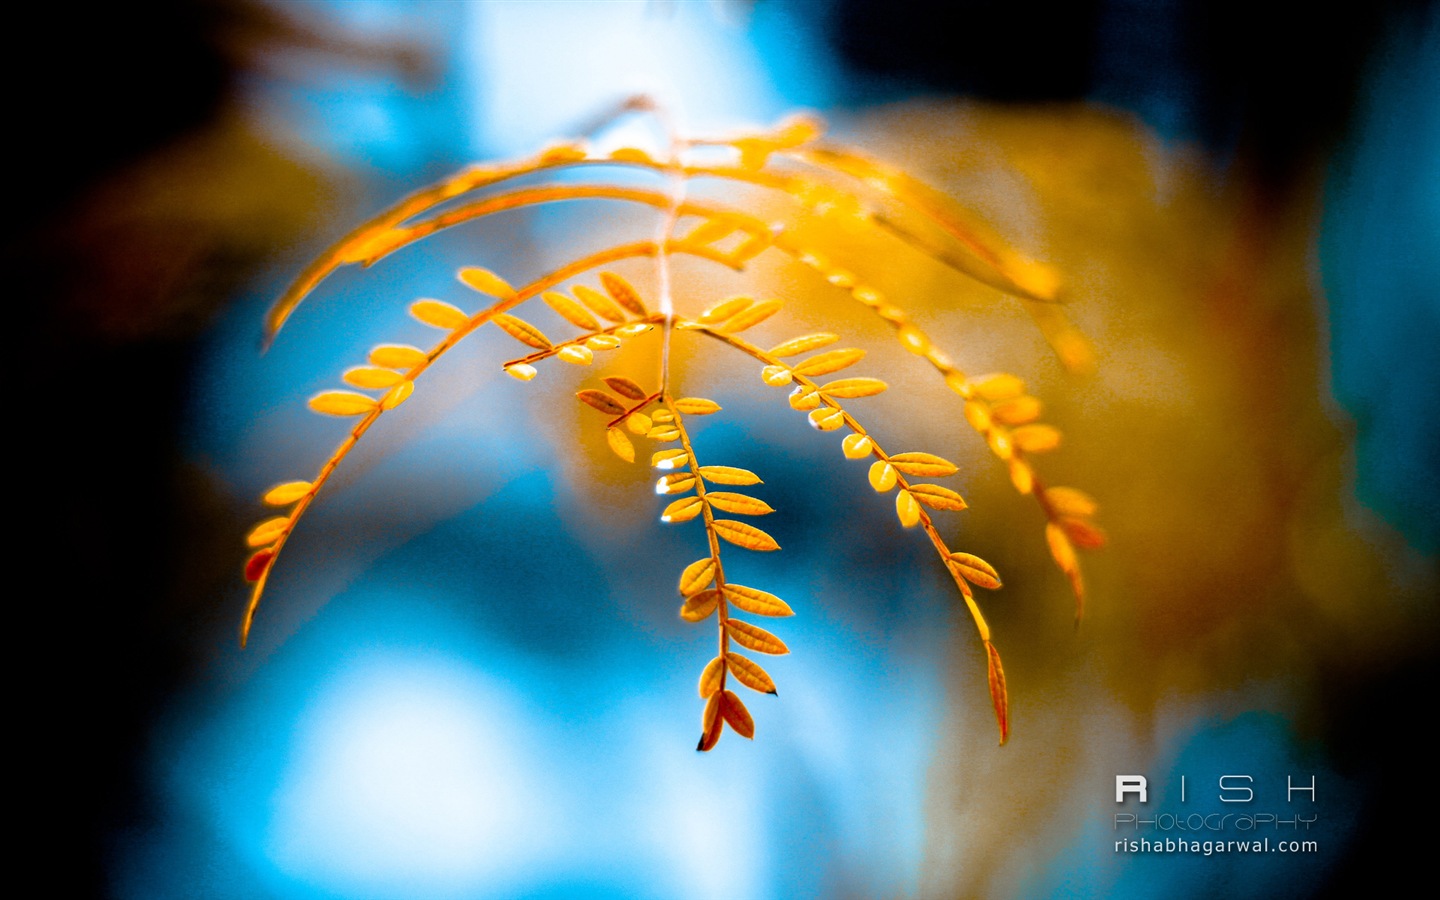 Windows 8 Wallpapers: Moments Captured #4 - 1440x900